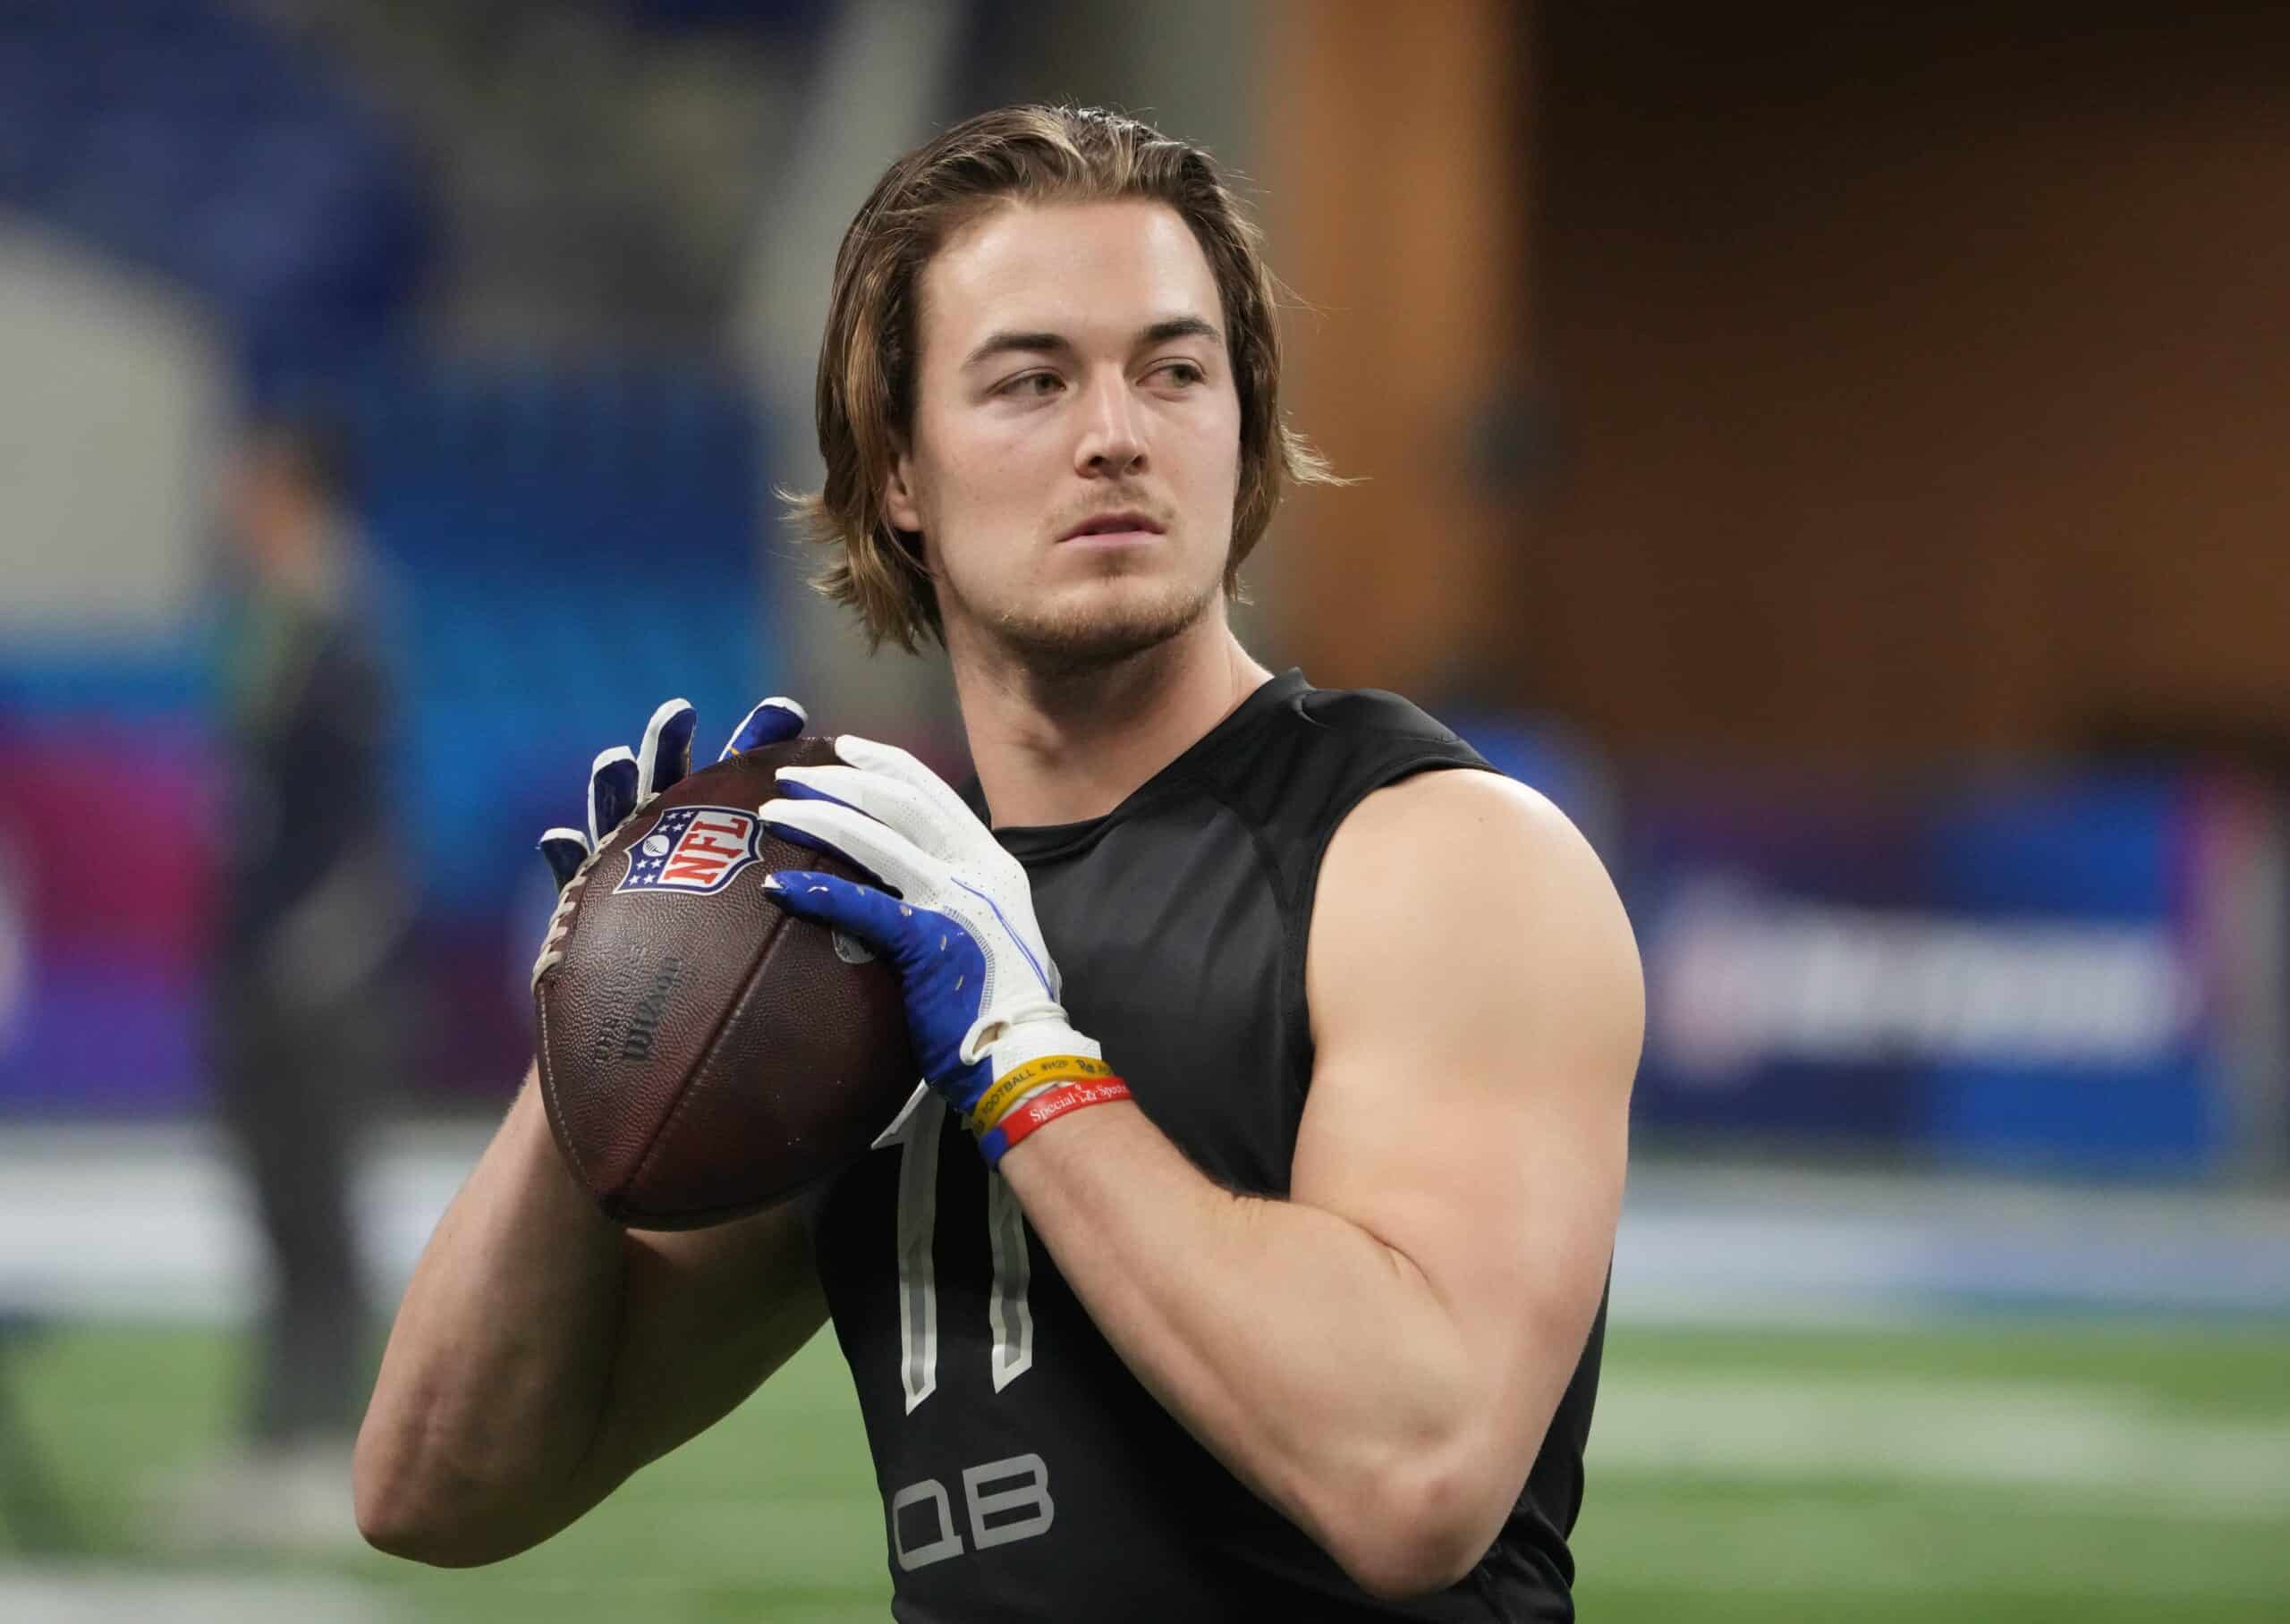 QB prospect Kenny Pickett measured unusually small hands at NFL combine -  The Washington Post